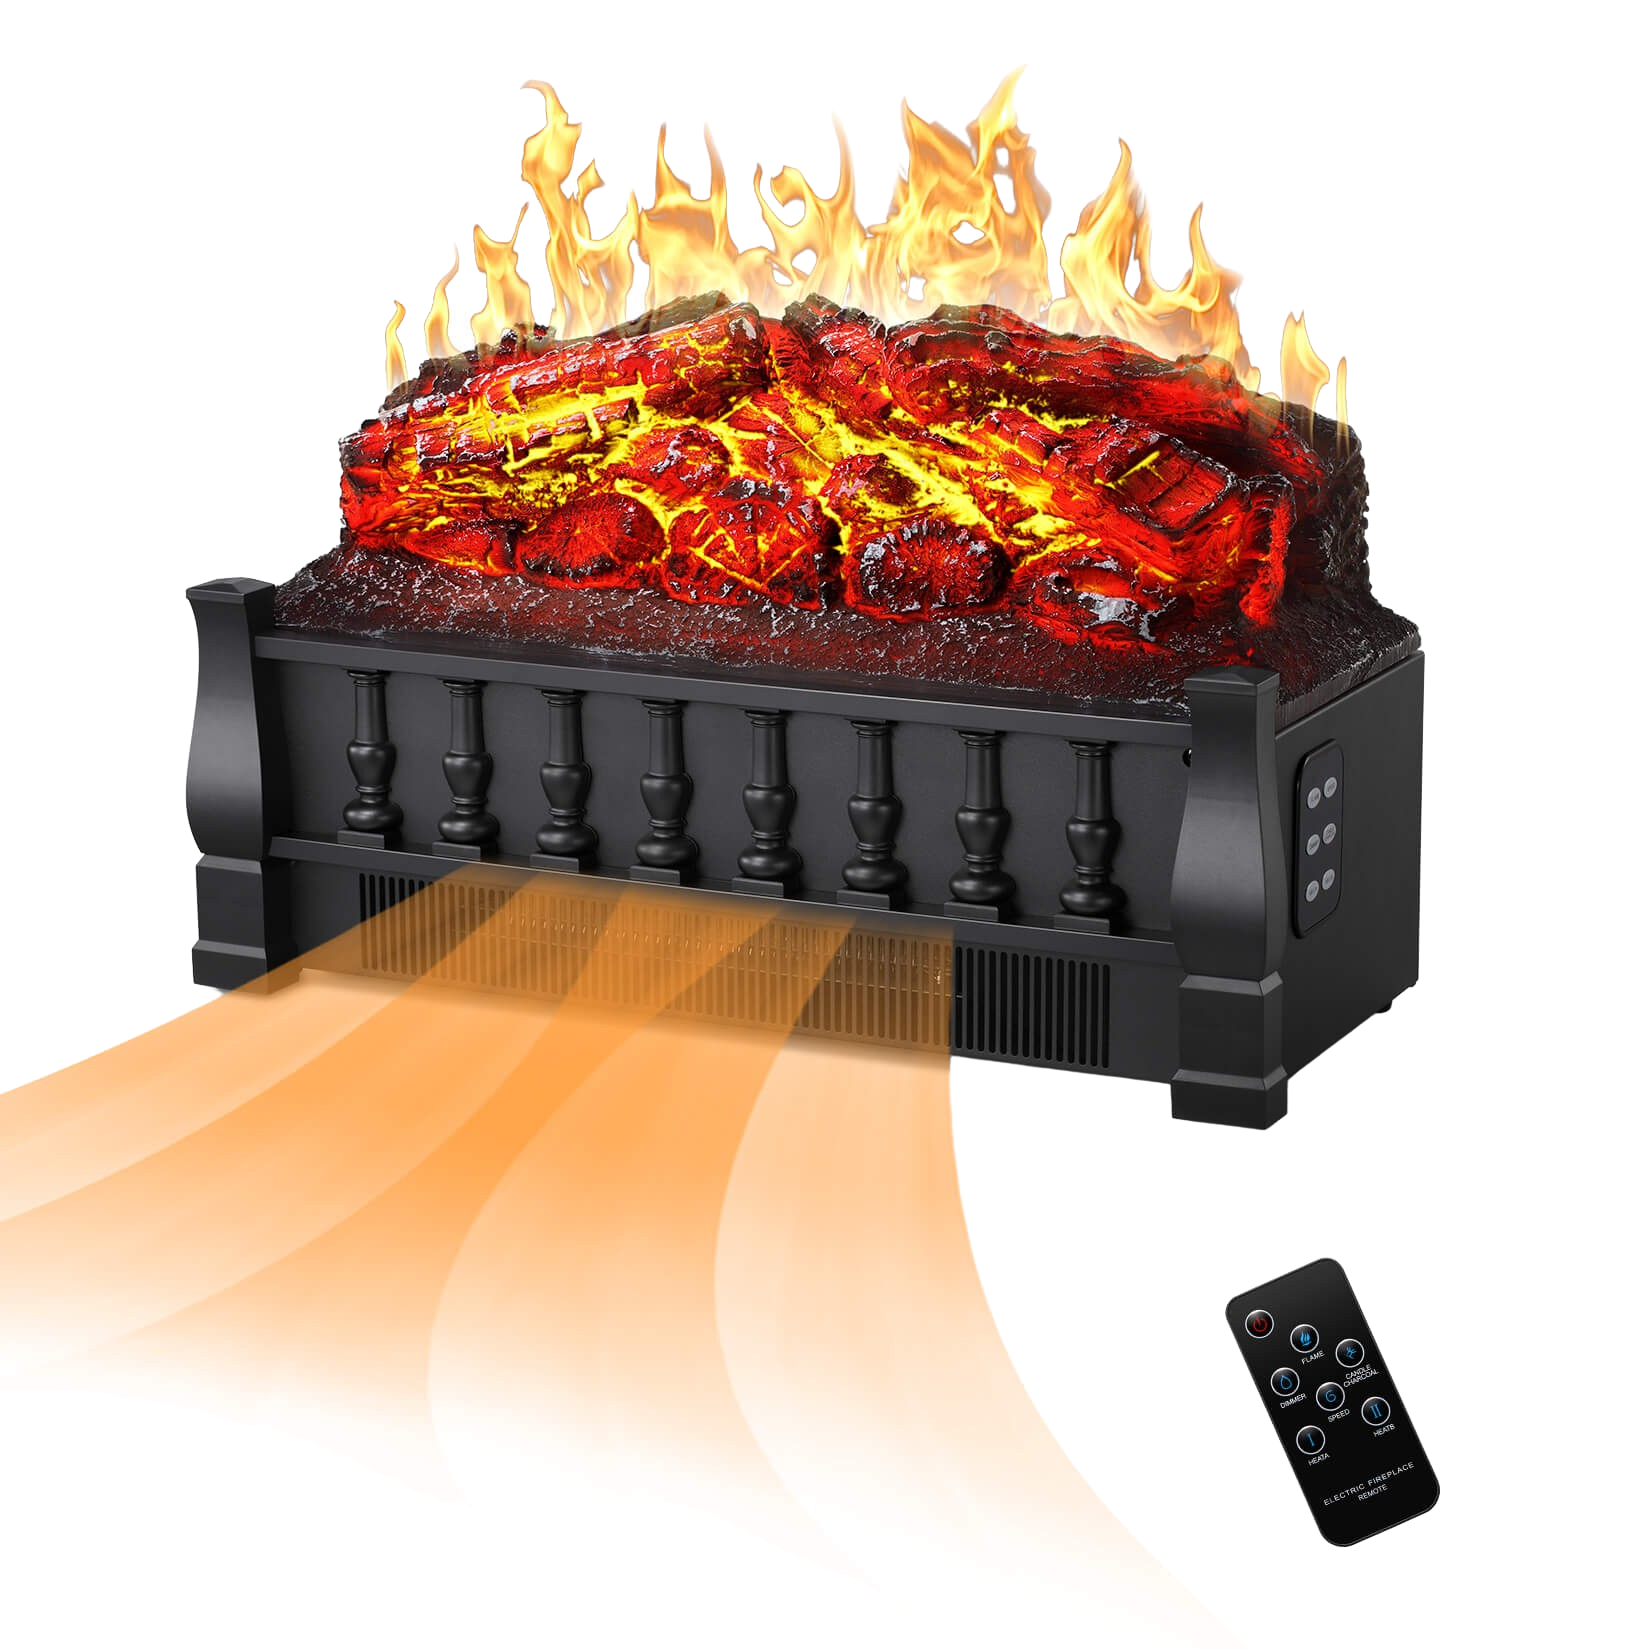 RW FLAME, RW Flame L250 750W-1500W 20.53 Inch Realistic Flame and Ember Bed Electric Fireplace Log Heater With Remote New